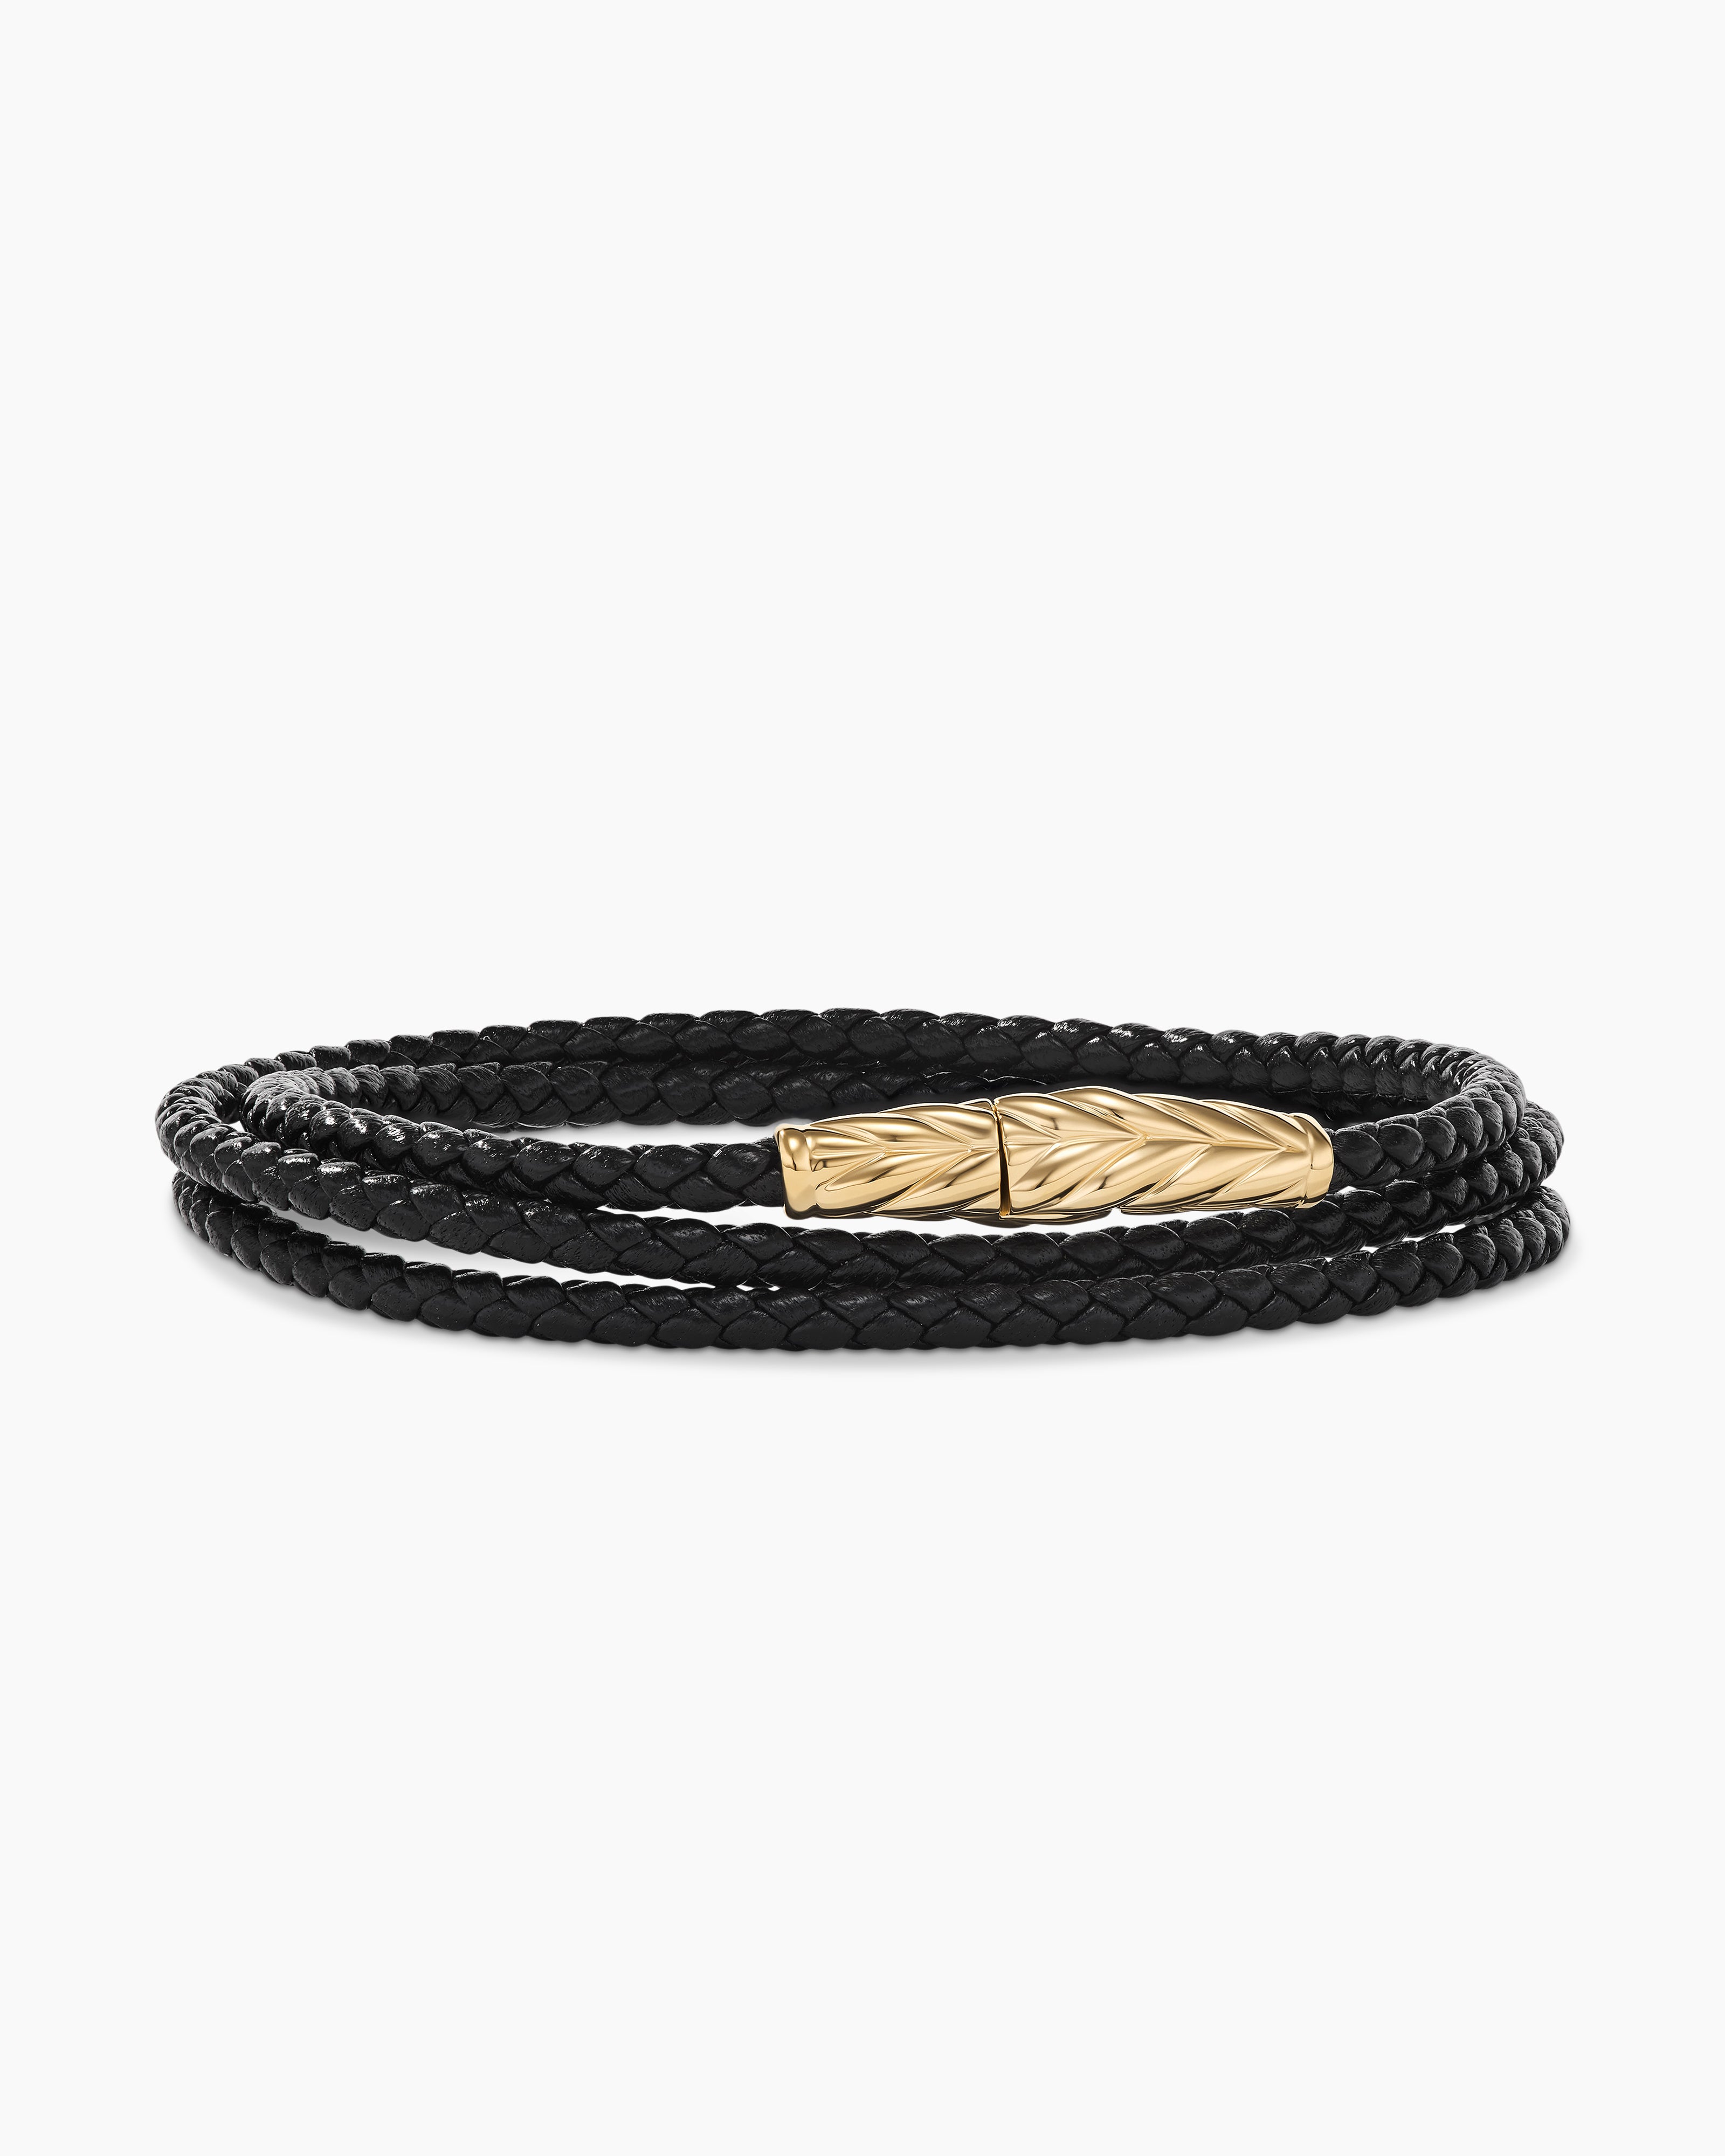 Gold Shimmer Leather Bracelet With Magnetic Clasp No.3 - Nest Pretty Things